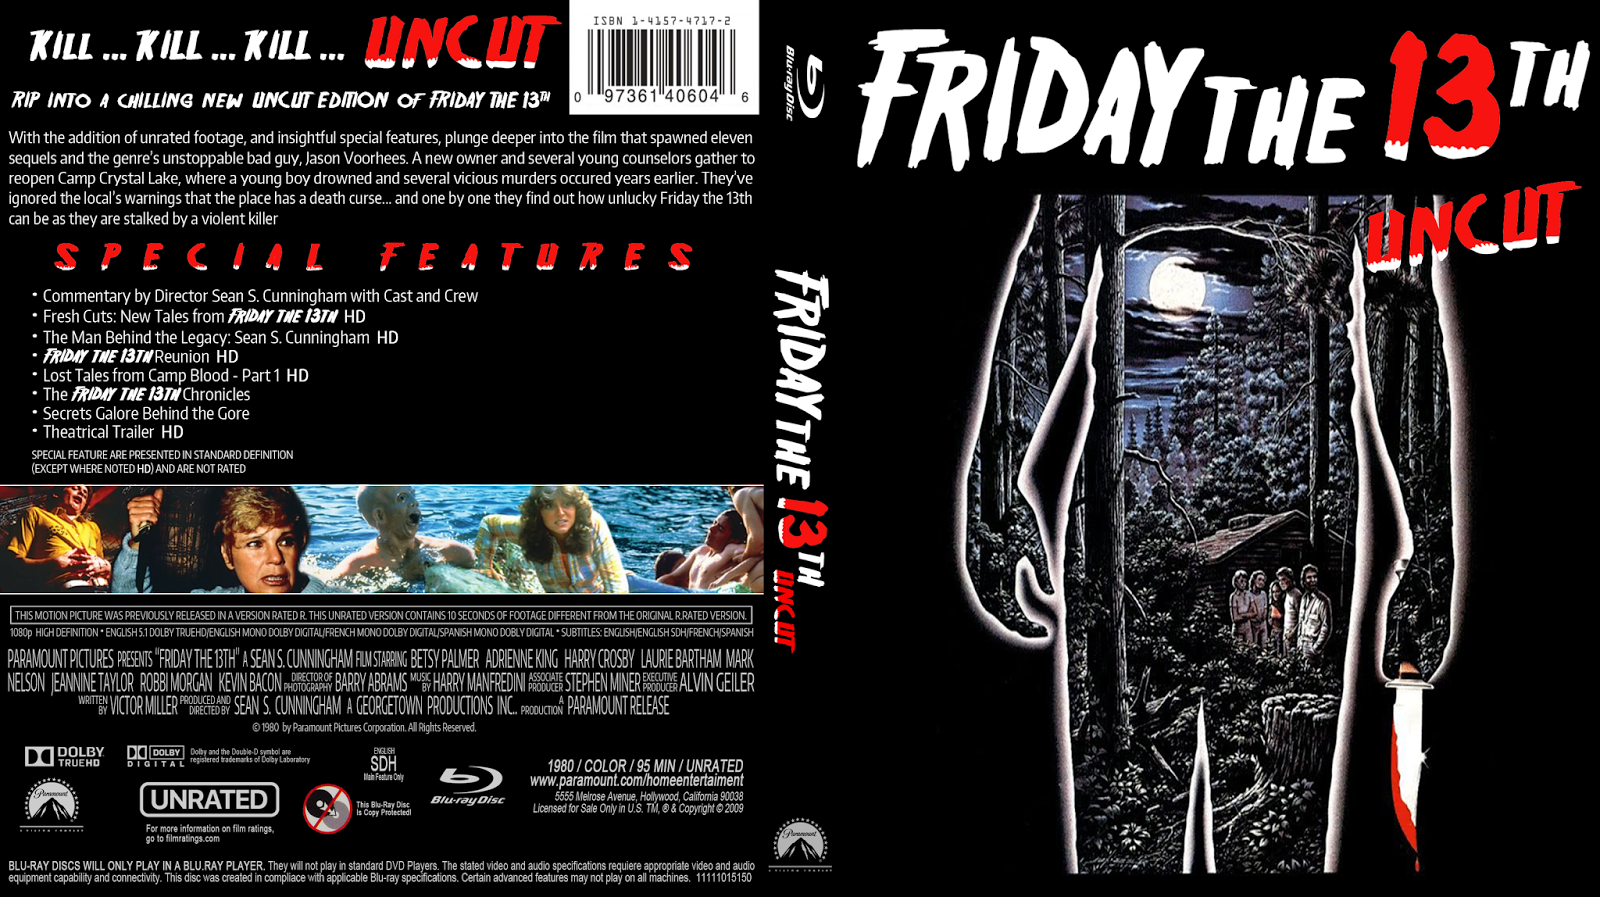 Friday the 13th (1980) DVD cover by TCF1138 on DeviantArt